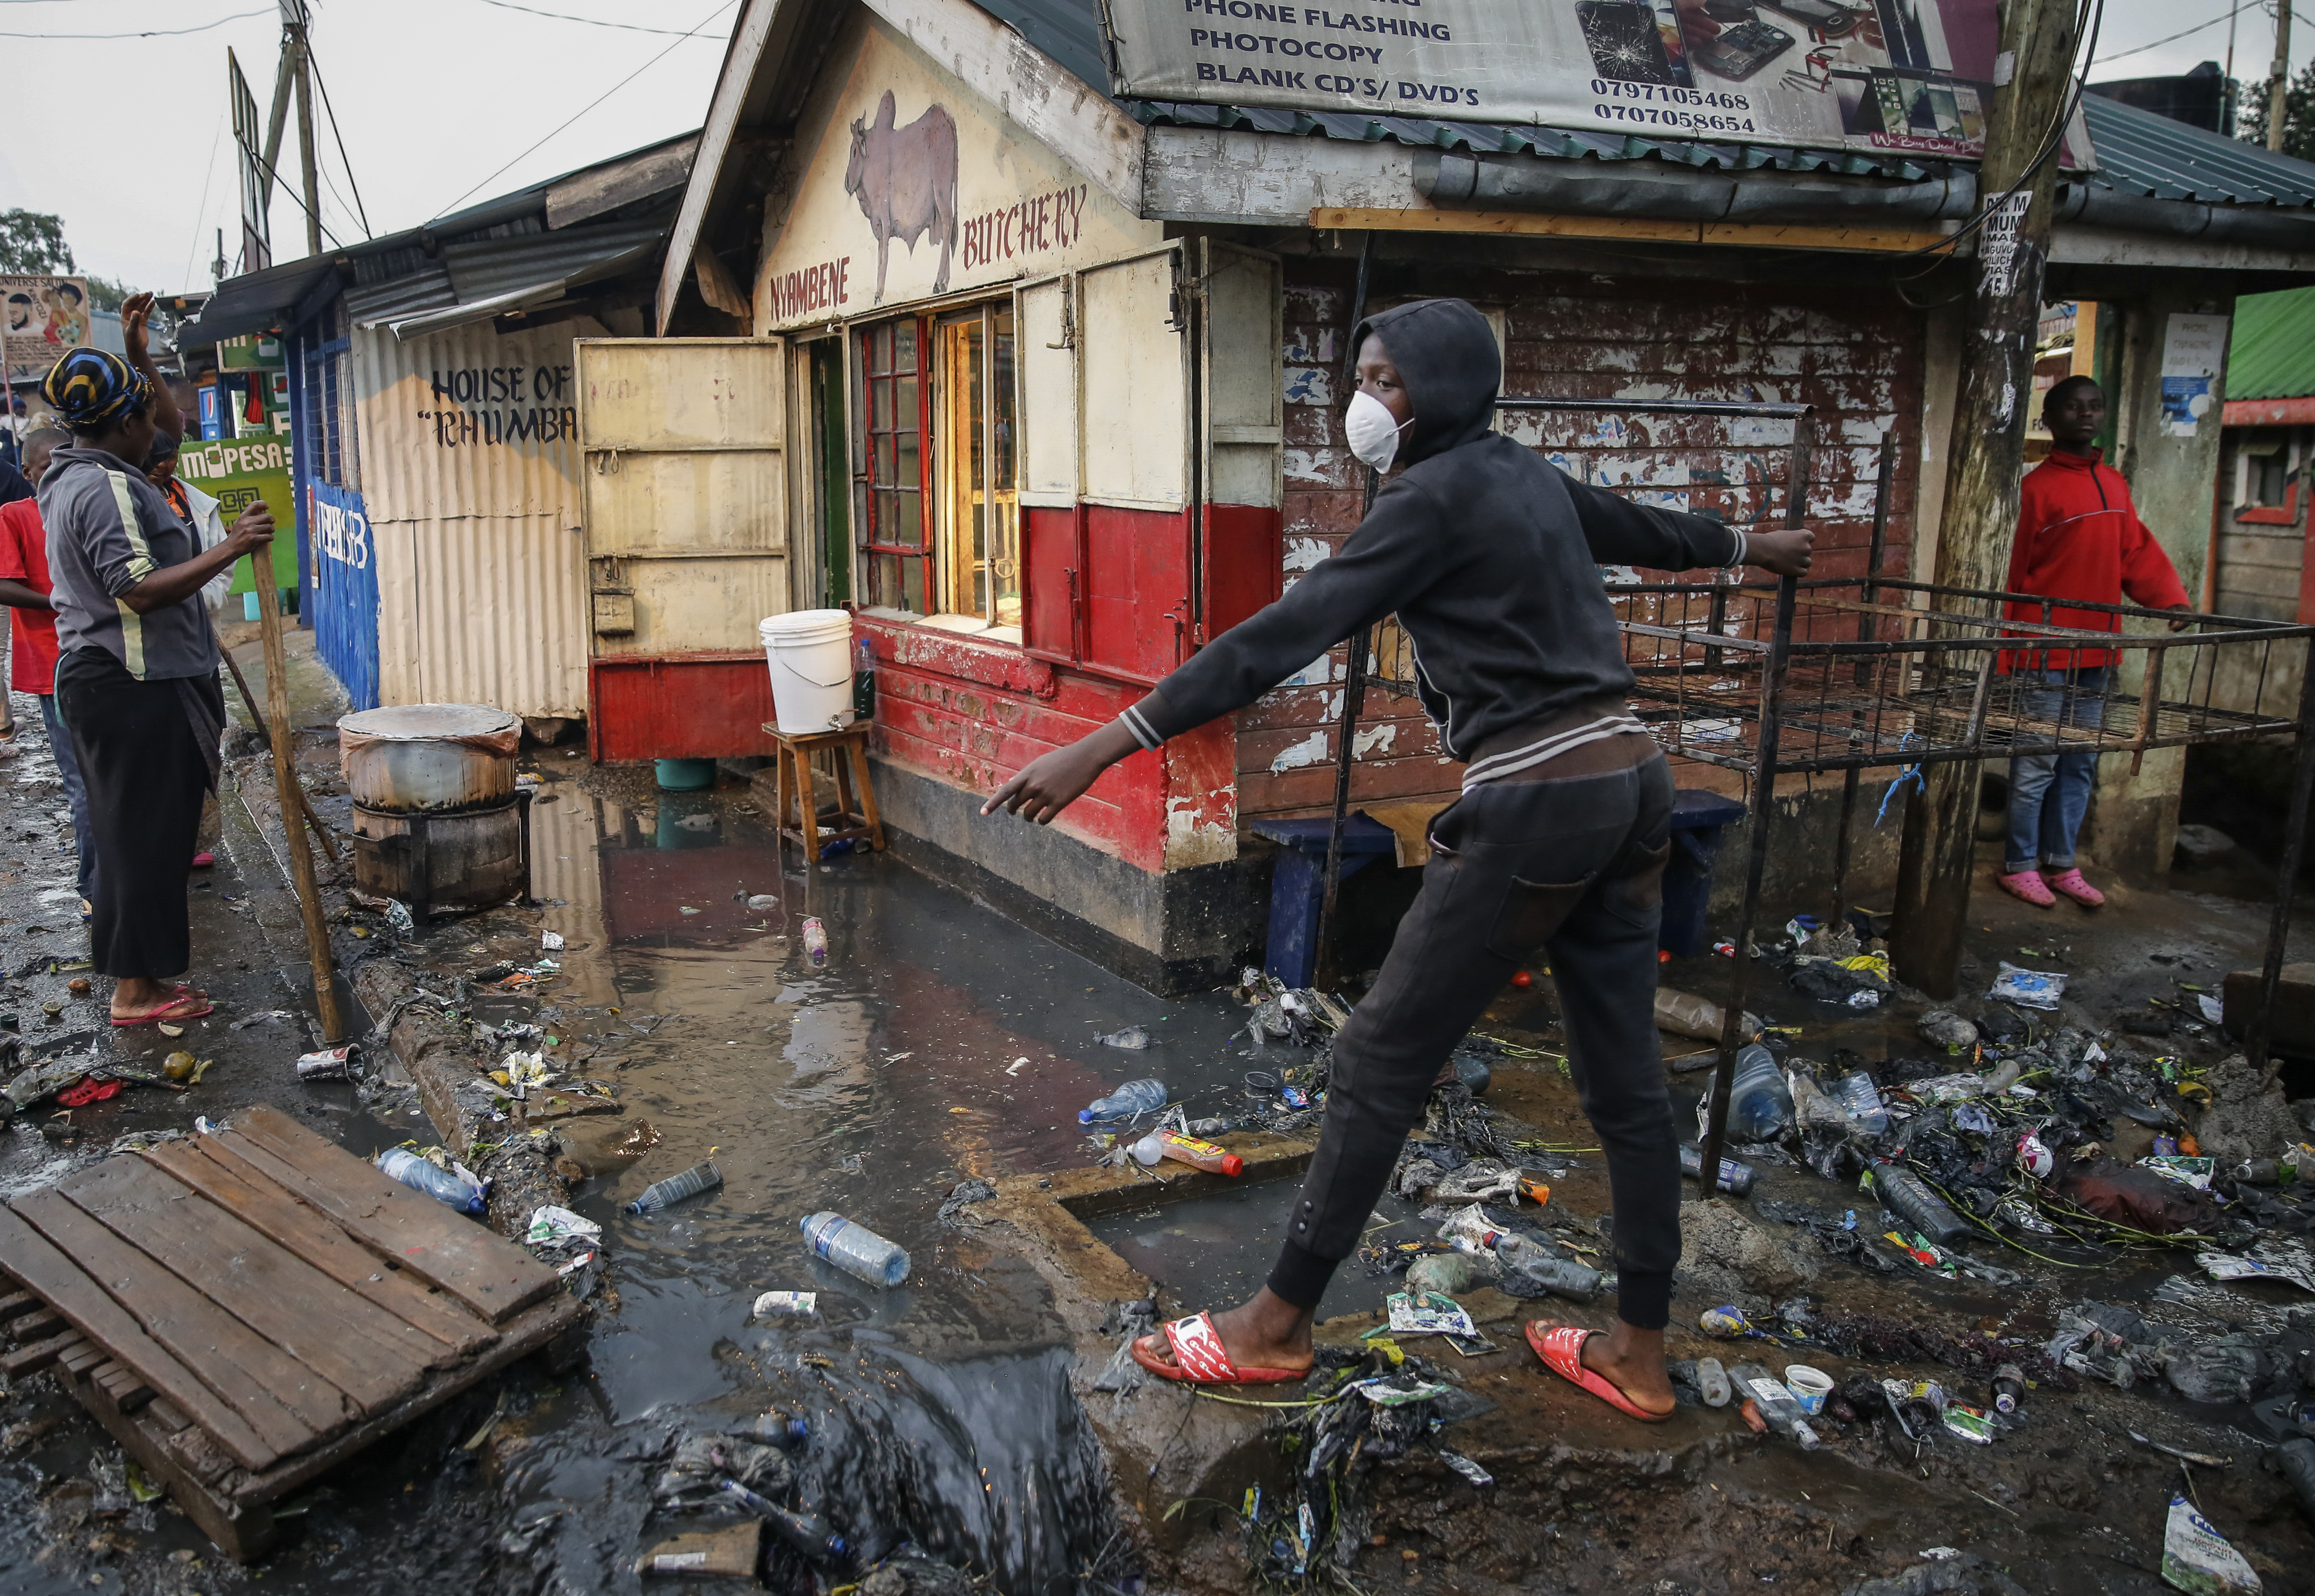 A boy wears a mask as a preventative measure against the spread of the new coronavirus, as he navigates floodwaters mixed with garbage following heavy rains, in the Kibera slum, or informal settlement, of Nairobi, Kenya, on Thursday, March 26, 2020. Many slum residents say staying at home or social-distancing is impossible for those who live hand to mouth and receive daily wages for informal work, as is maintaining sanitation in densely populated areas where a pit latrine can be shared by dozens. (AP Photo/Brian Inganga)